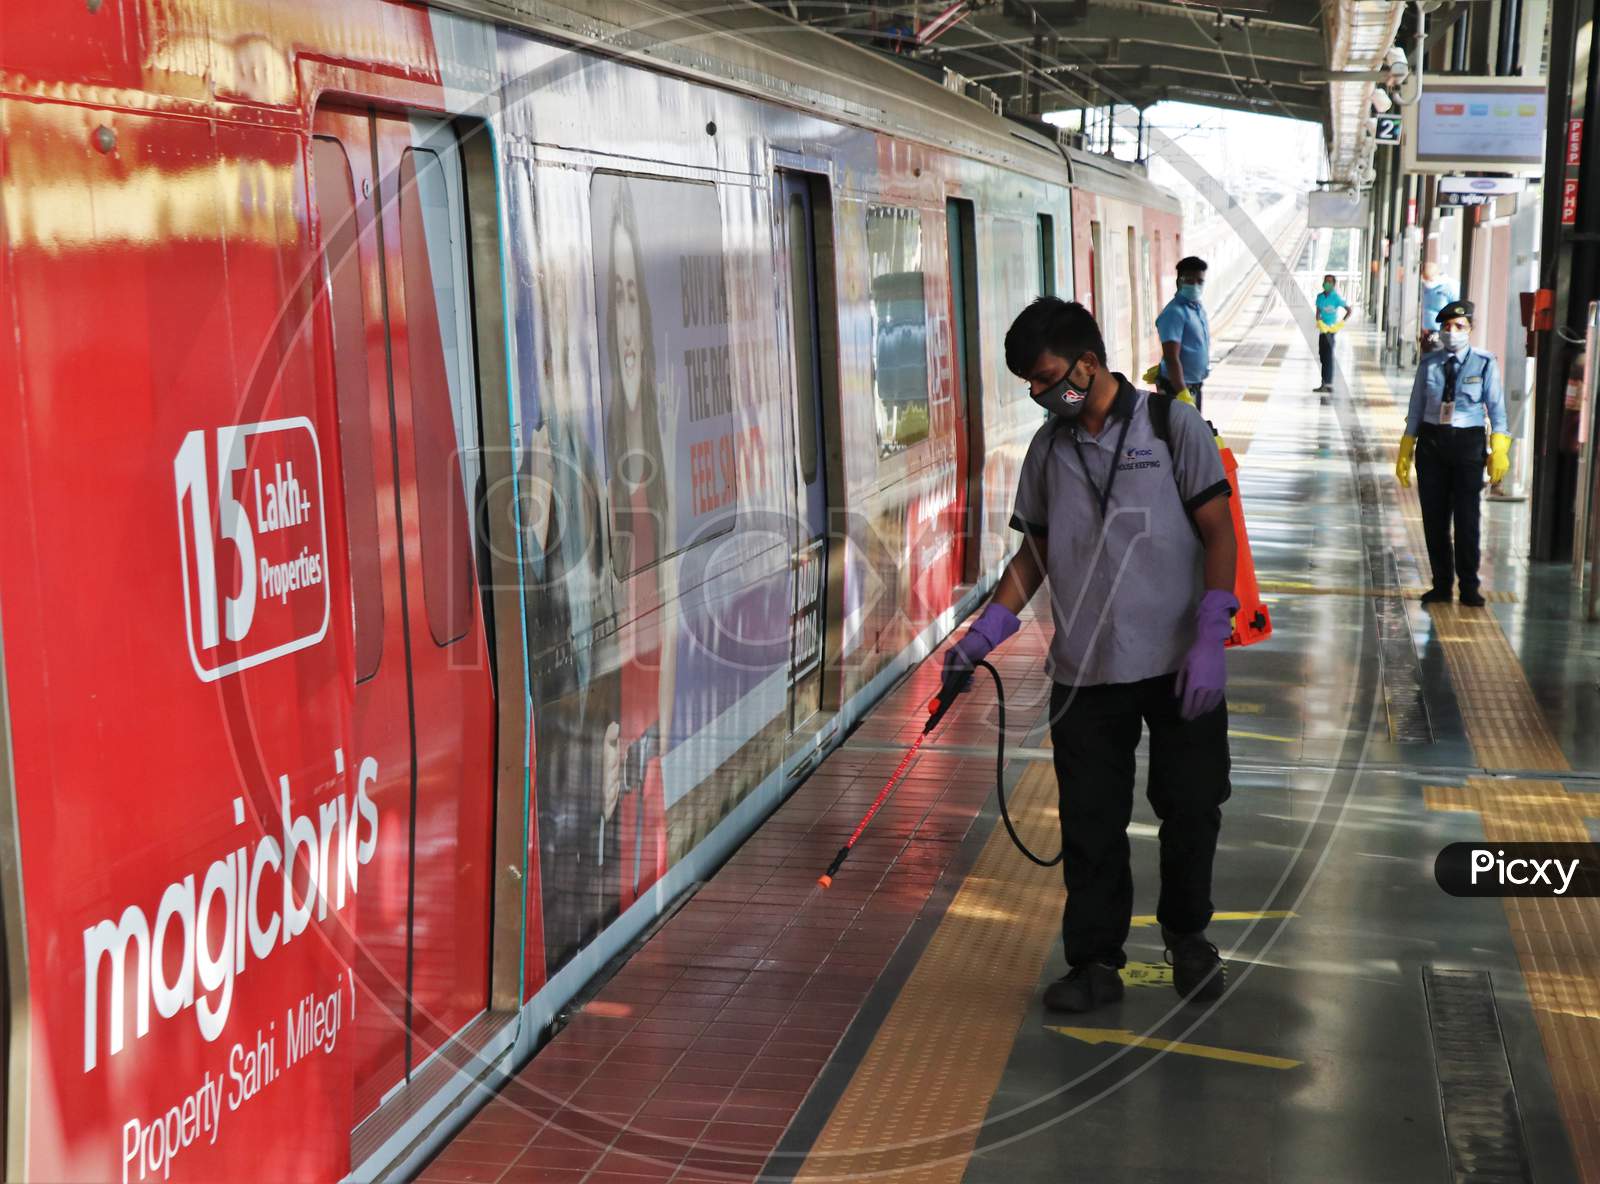 A worker sanitizes a platform as metro network prepares to resume services after more than a 6-month shutdown due to the Covid-19 coronavirus pandemic, at the Andheri metro station in Mumbai, October, 2020.